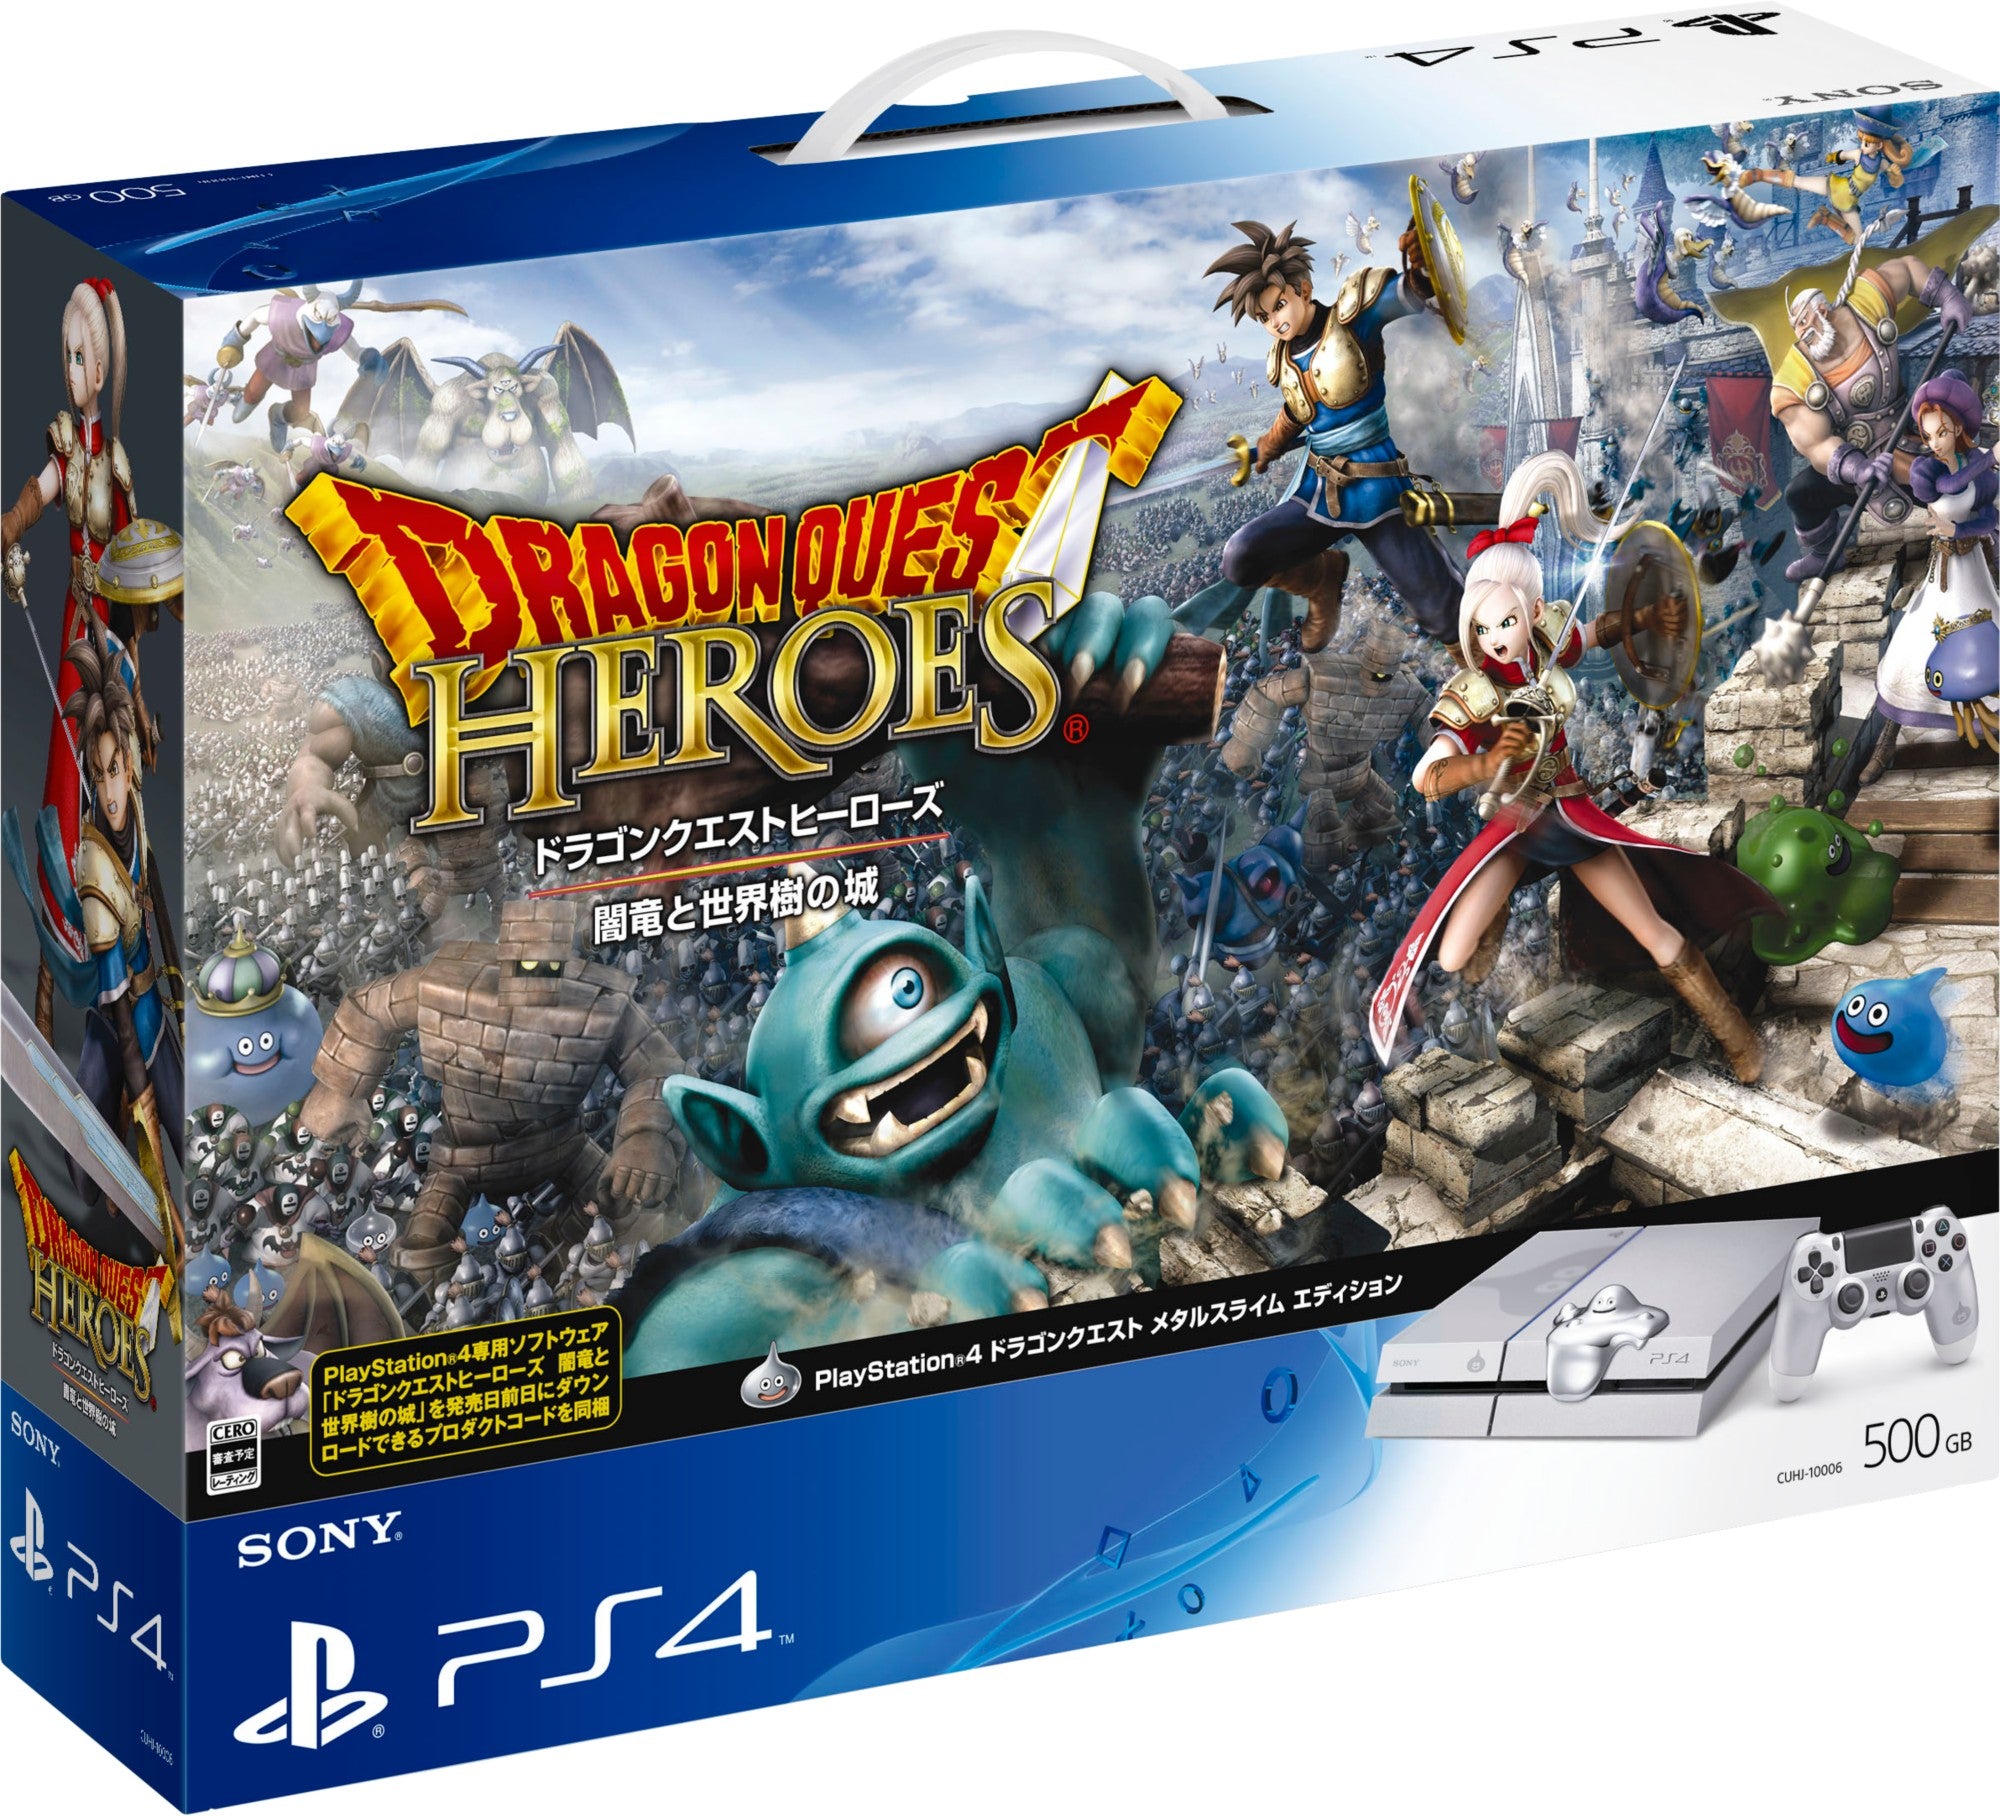 RetroPixl Sony Playstation 4 (PS4) Dragon Quest Heroes Metal Slime Limited Edition 